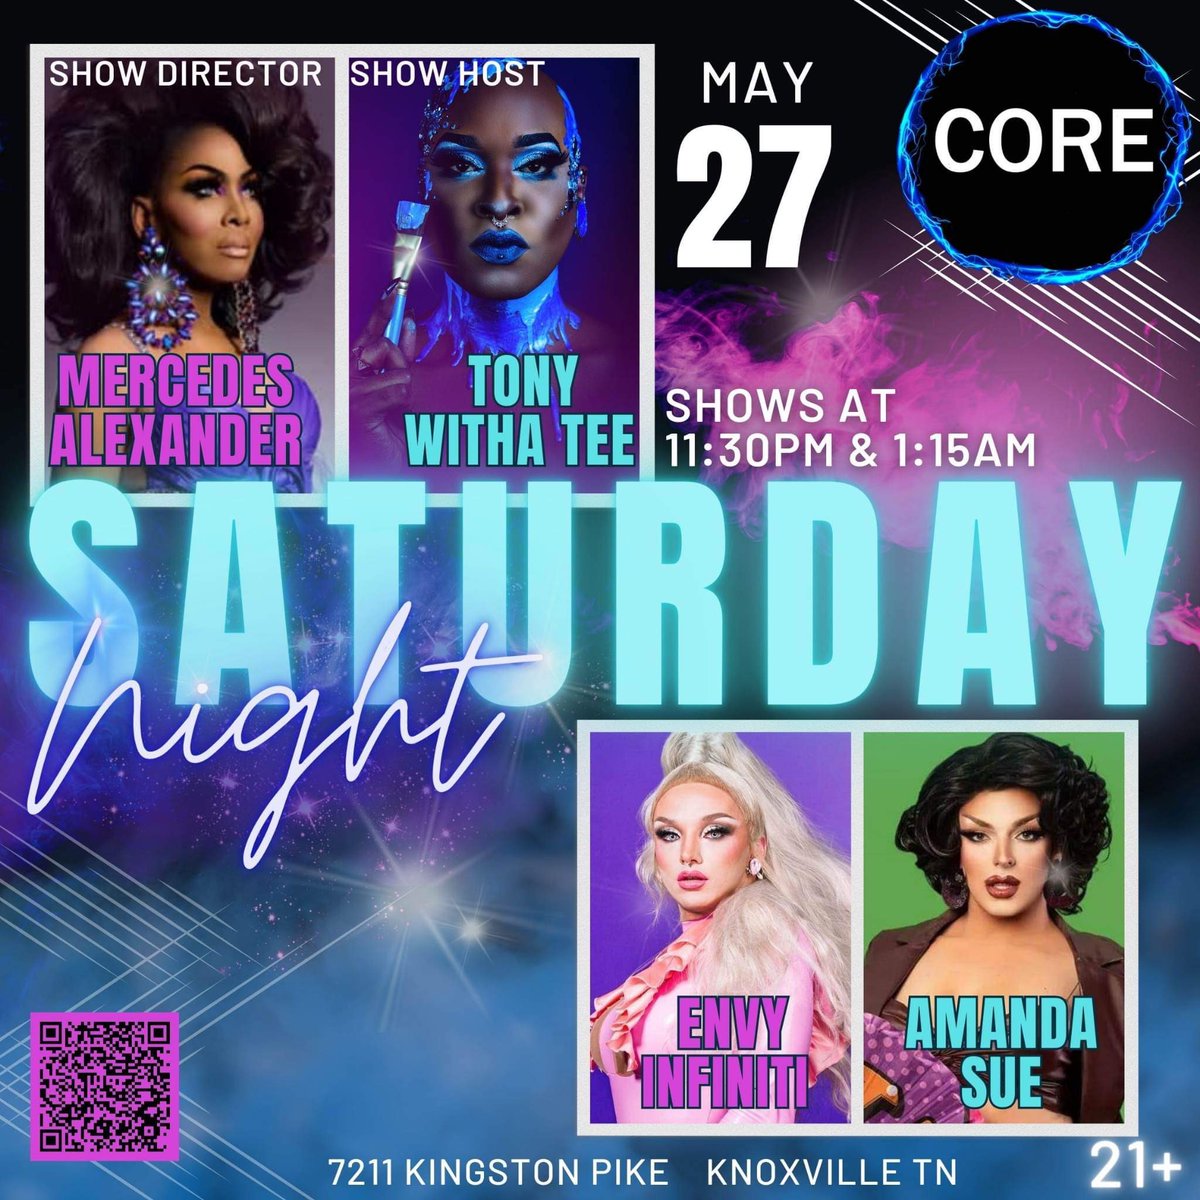 This Saturday Night at CORE! #Knoxvilletn #THEmercedesalexander #dragshow #dragisnotacrime